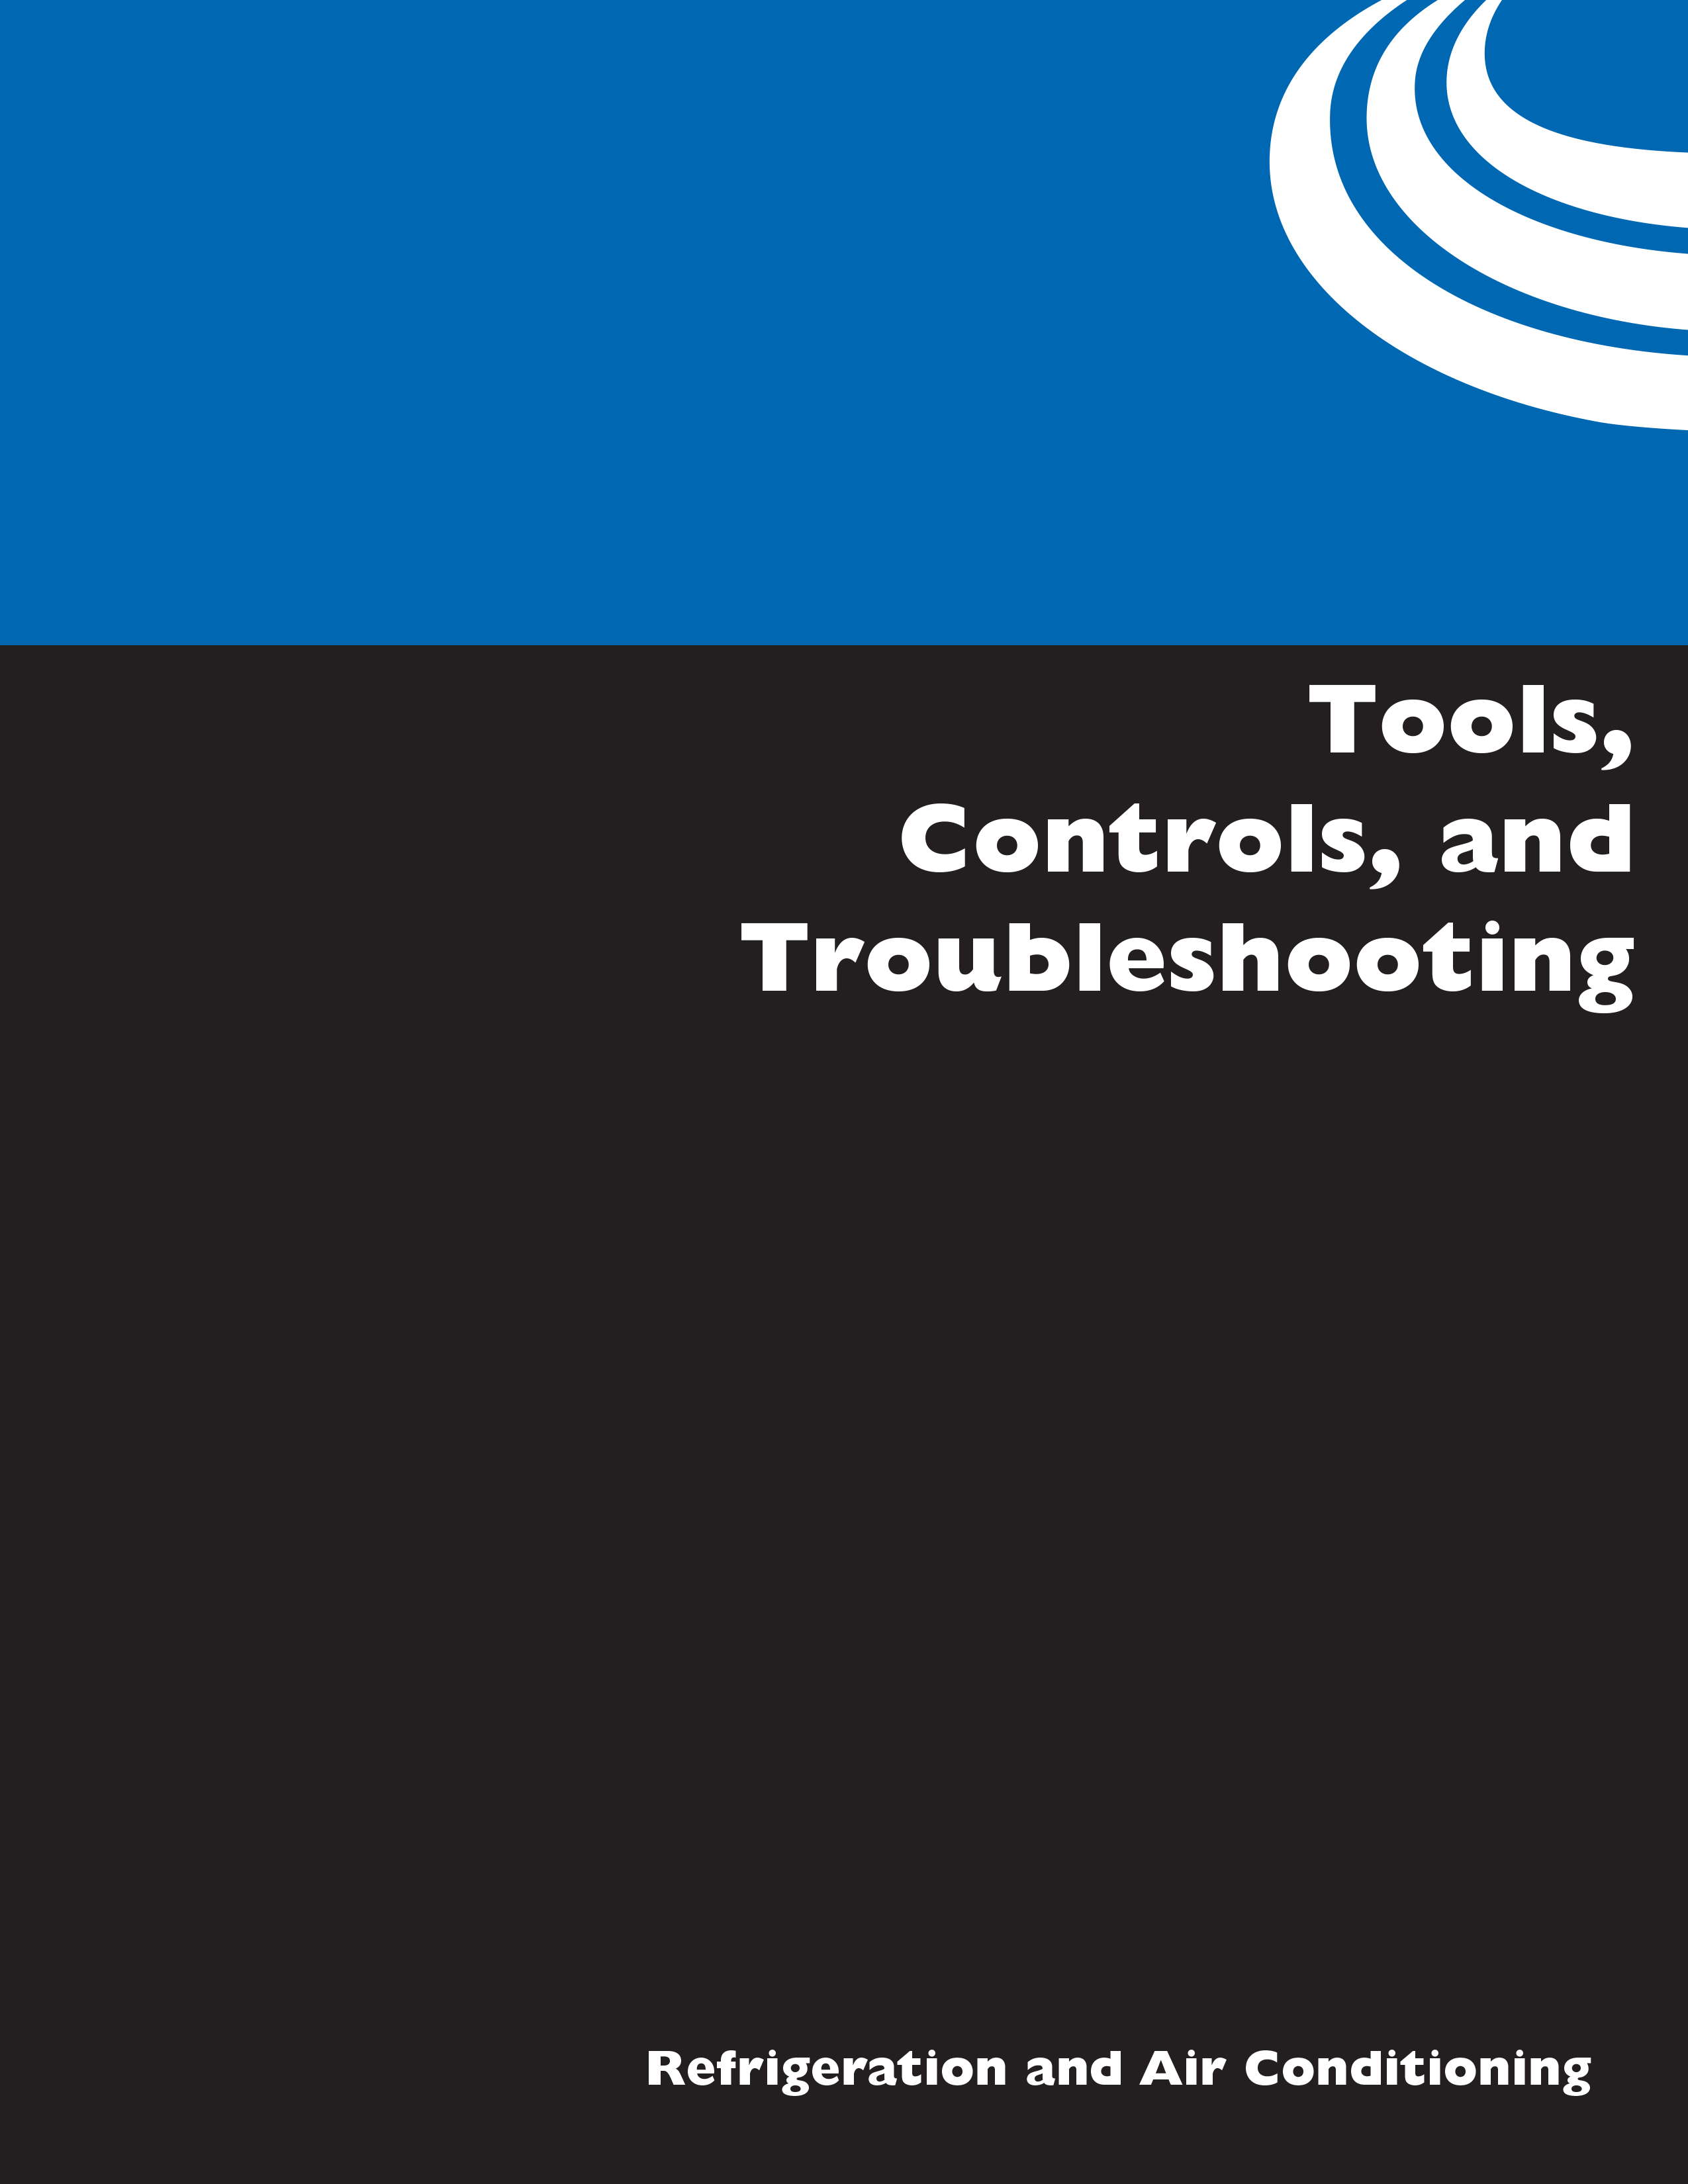 Tools, Controls, and Troubleshooting